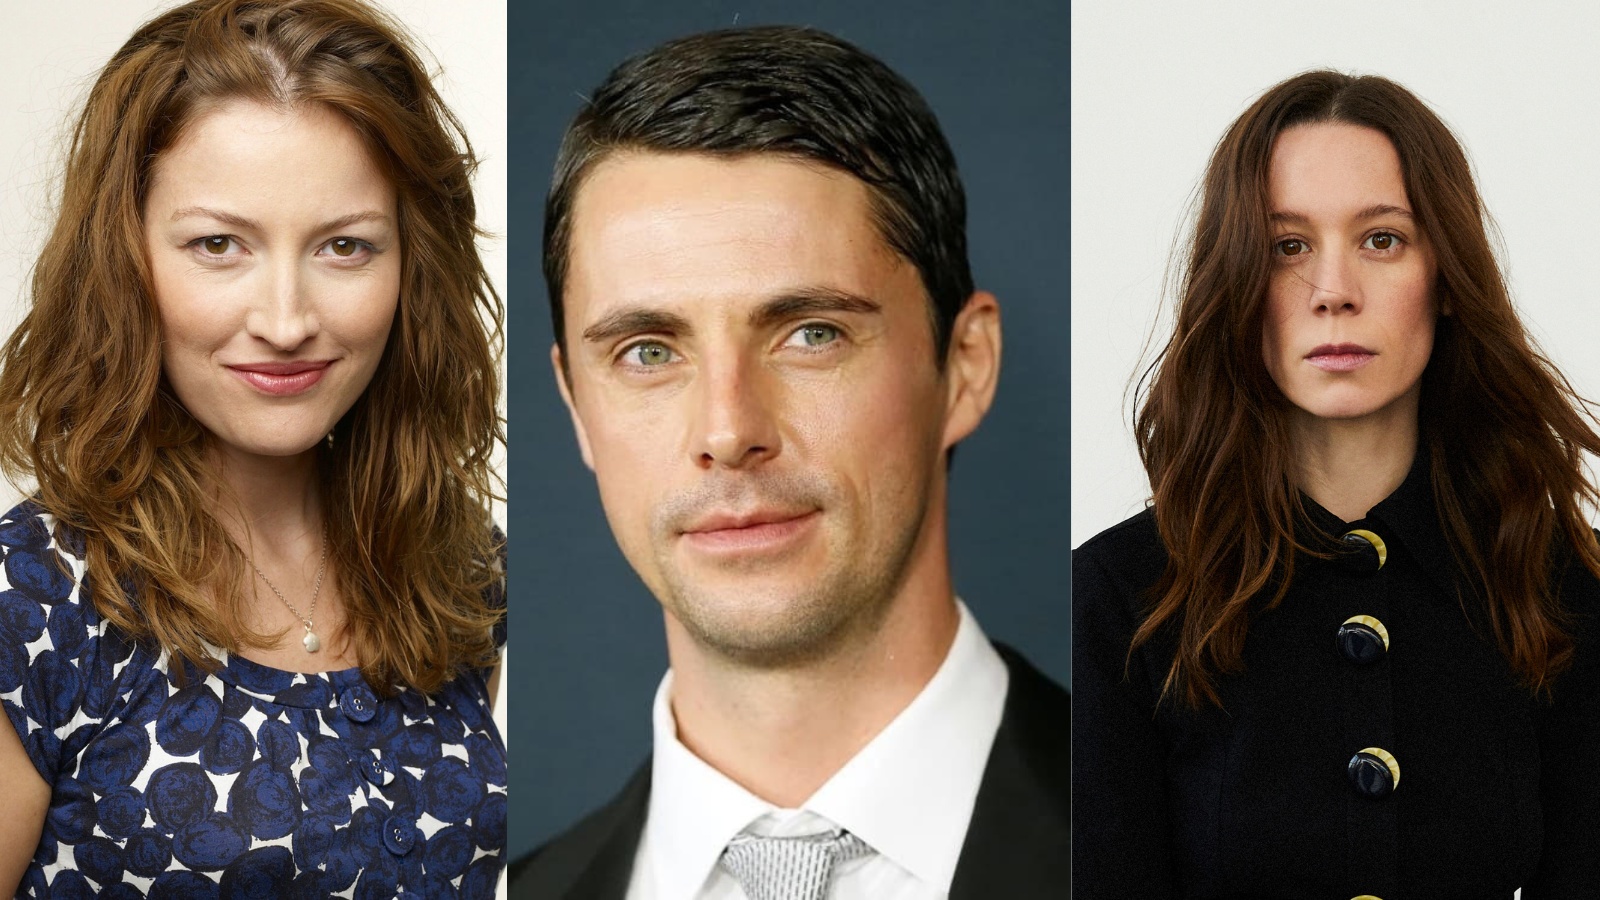 This image comprises three headshots of cast from television series Department Q, courtesy of Netflix. The first is of Kelly MacDonald, who wears a necklace and a white blouse with blue roses on it. The next headshot is of Matthew Goode, who were a black suit jacket, white shirt and silver tie. The final headshot in the image is Chloe Pirrie, who wears a black shirt with large black and gold buttons.